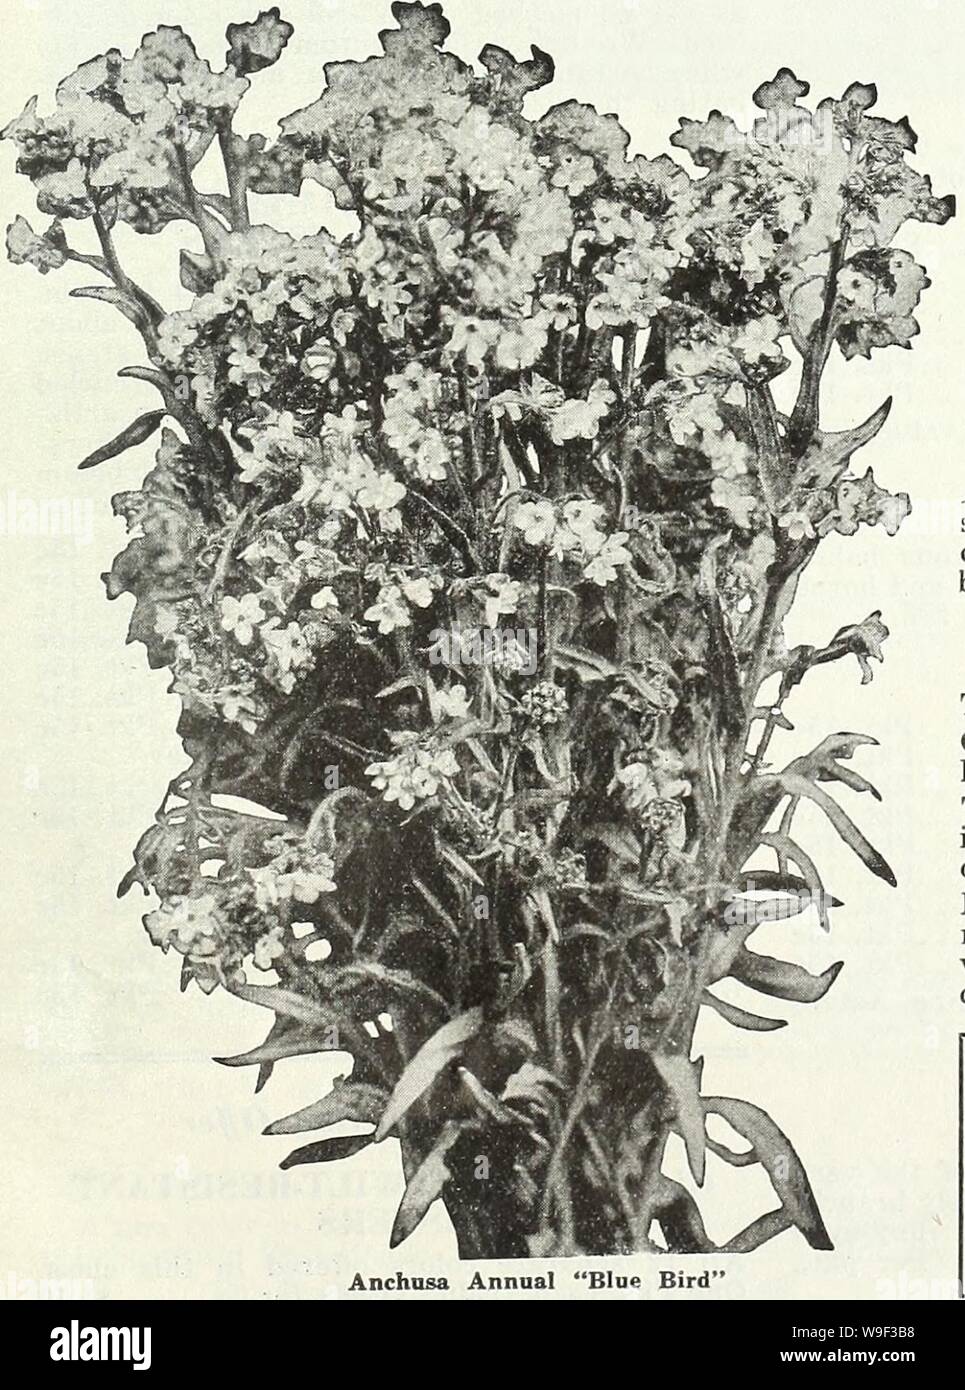 Archive image from page 12 of Currie's garden annual  spring,. Currie's garden annual : spring, 1935 60th year  curriesgardenann19curr 1 Year: 1935 ( ARGEMONE GRANDIFLORA (The Prickly Poppy)—2 ft. They have branching, prickly stems with glaucous leaves with spiny margins. The large Poppylike, white flow- ers of silken texture with a mass of golden anthers in the centers makes them additionally attractive. Pkt. 10c ANNUAL ANCHUSA (Blue Bird) A new annual Anchusa, which grows about 18 inches tall; is of compact habit and bears its rich indigo flowers at the top of the plant. Pkt. 15c For Perenni Stock Photo